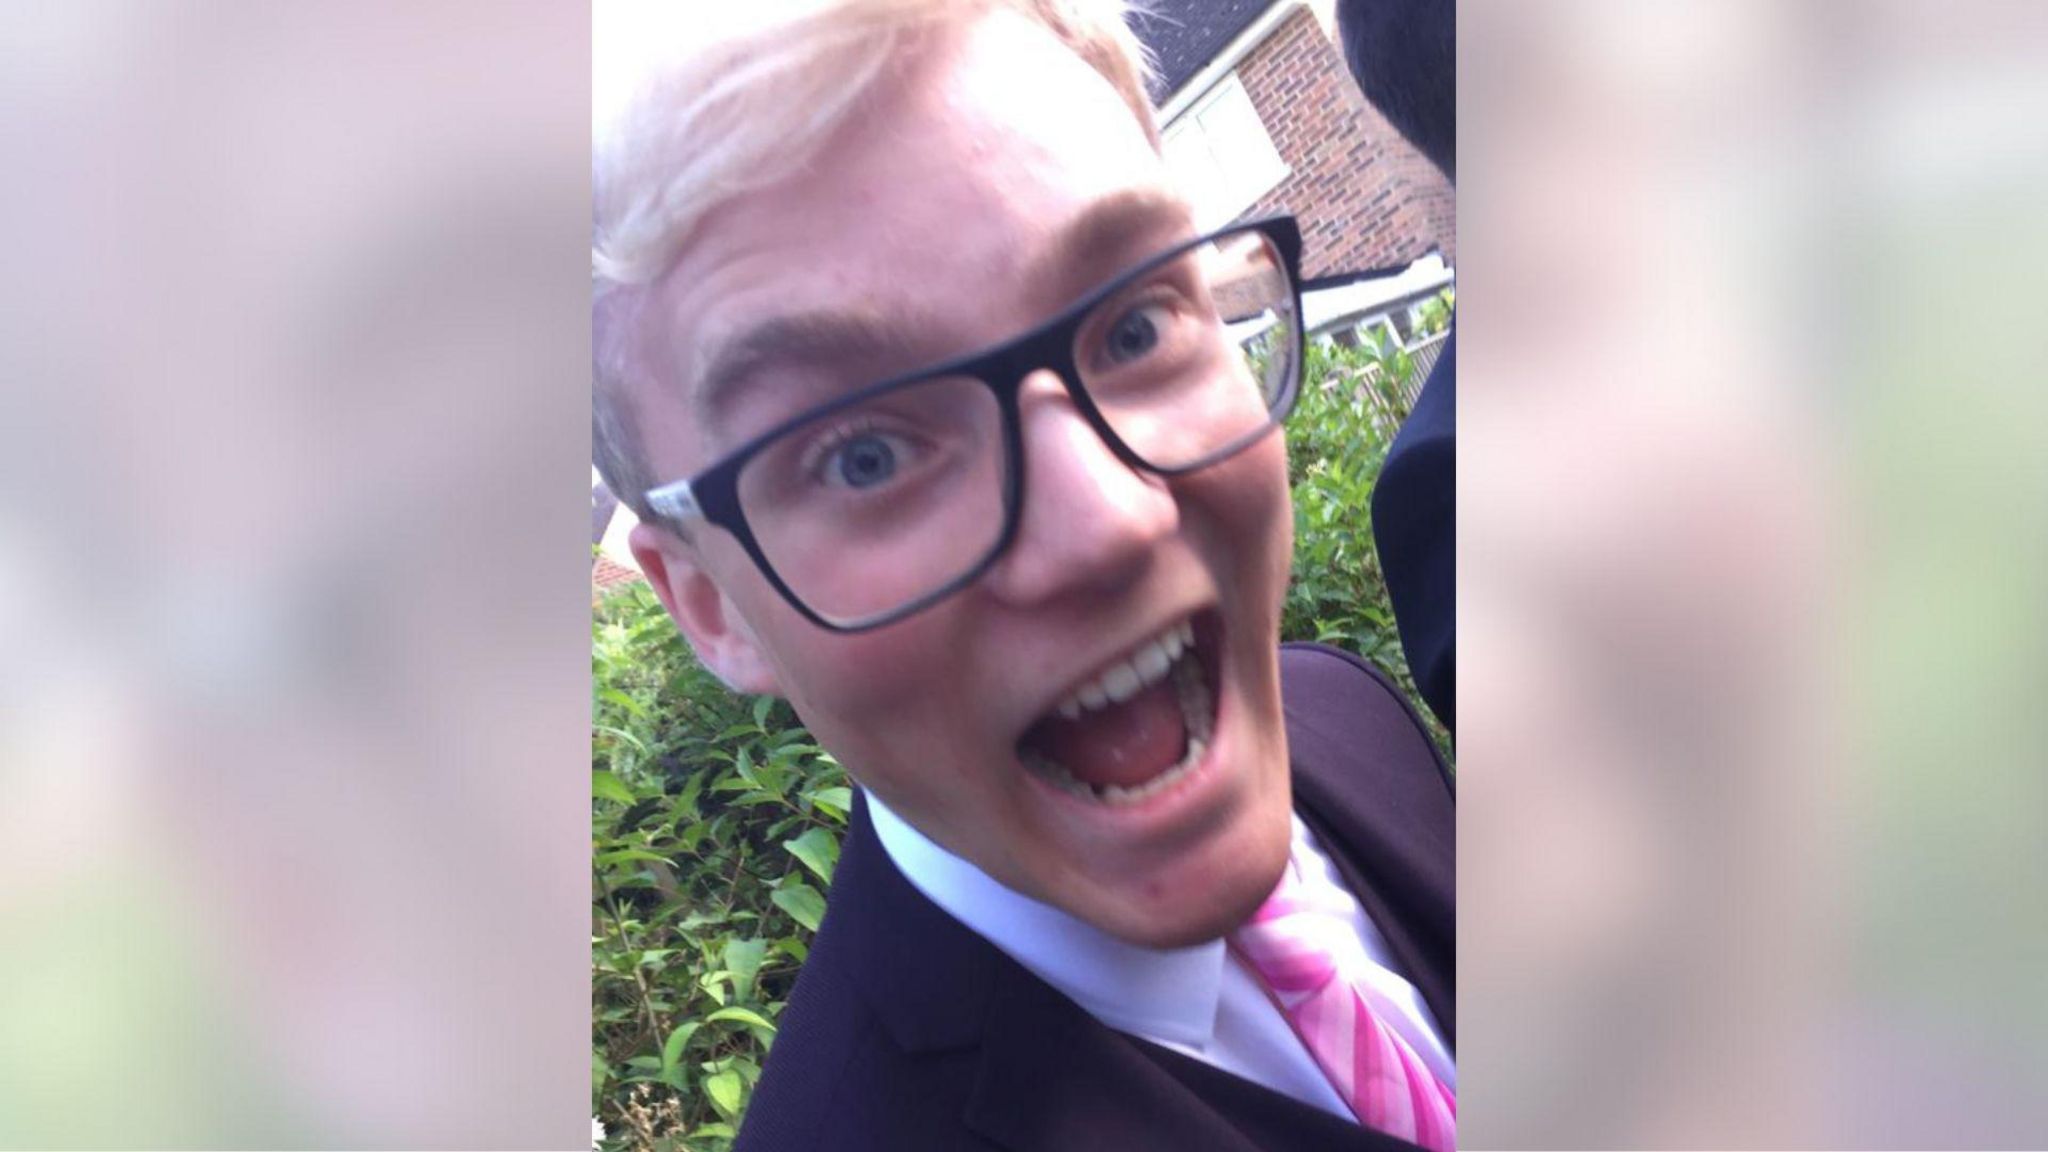 A man with blonde hair and glasses. He is stood in front of a bush wearing a white shirt, pink tie and black blazer. He is smiling with an open mouth.